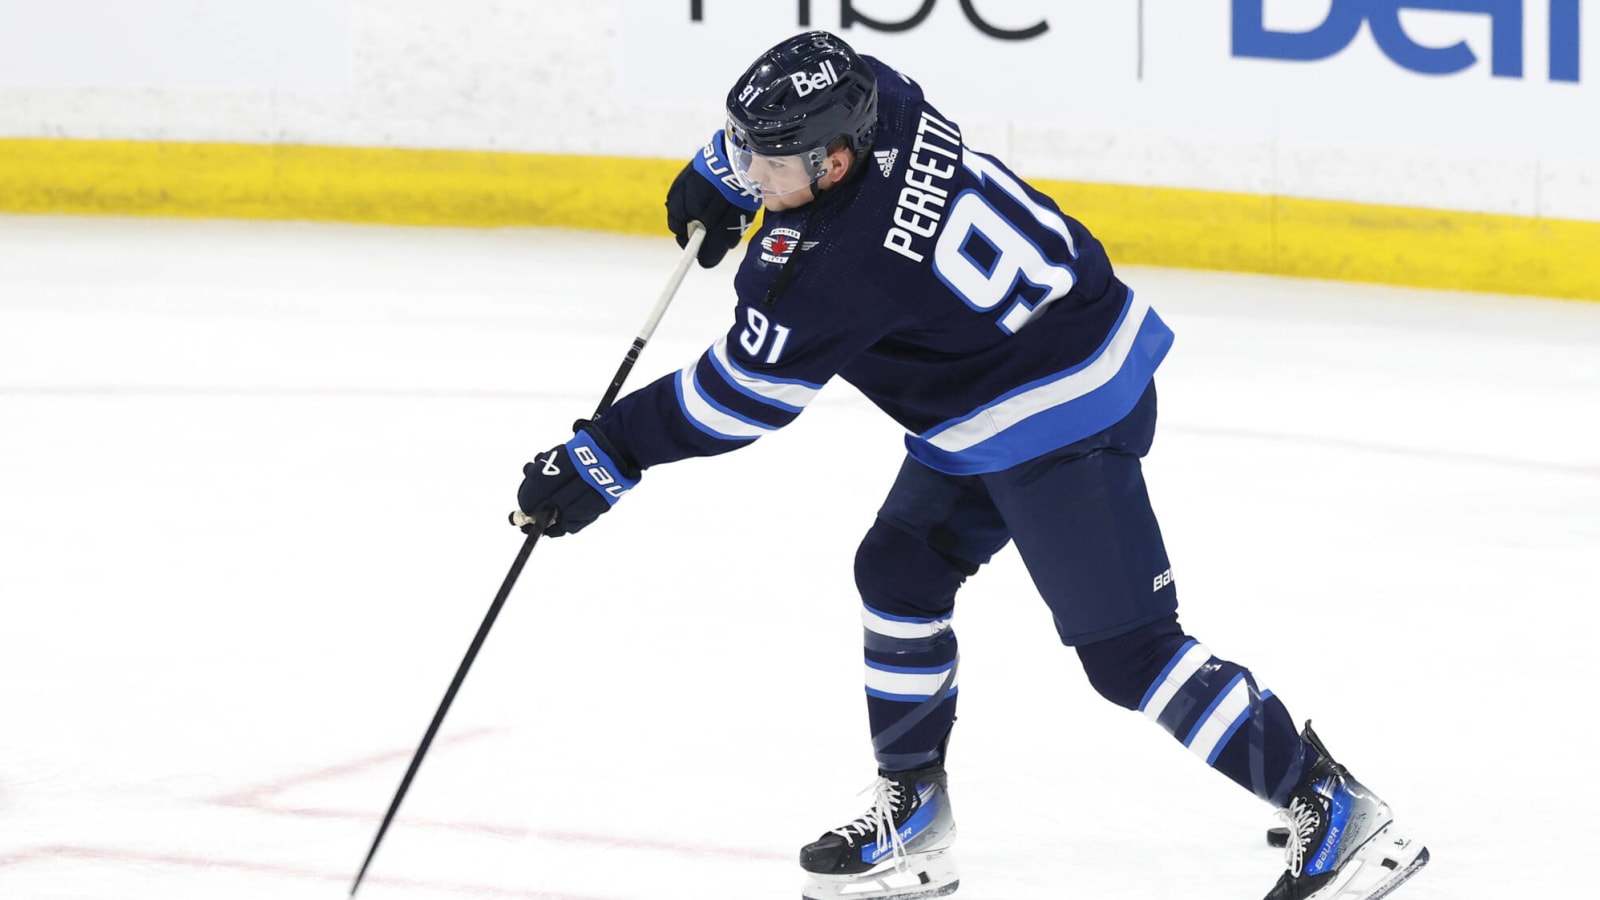 Jets’ Negotiations with RFA Cole Perfetti Could Be Challenging